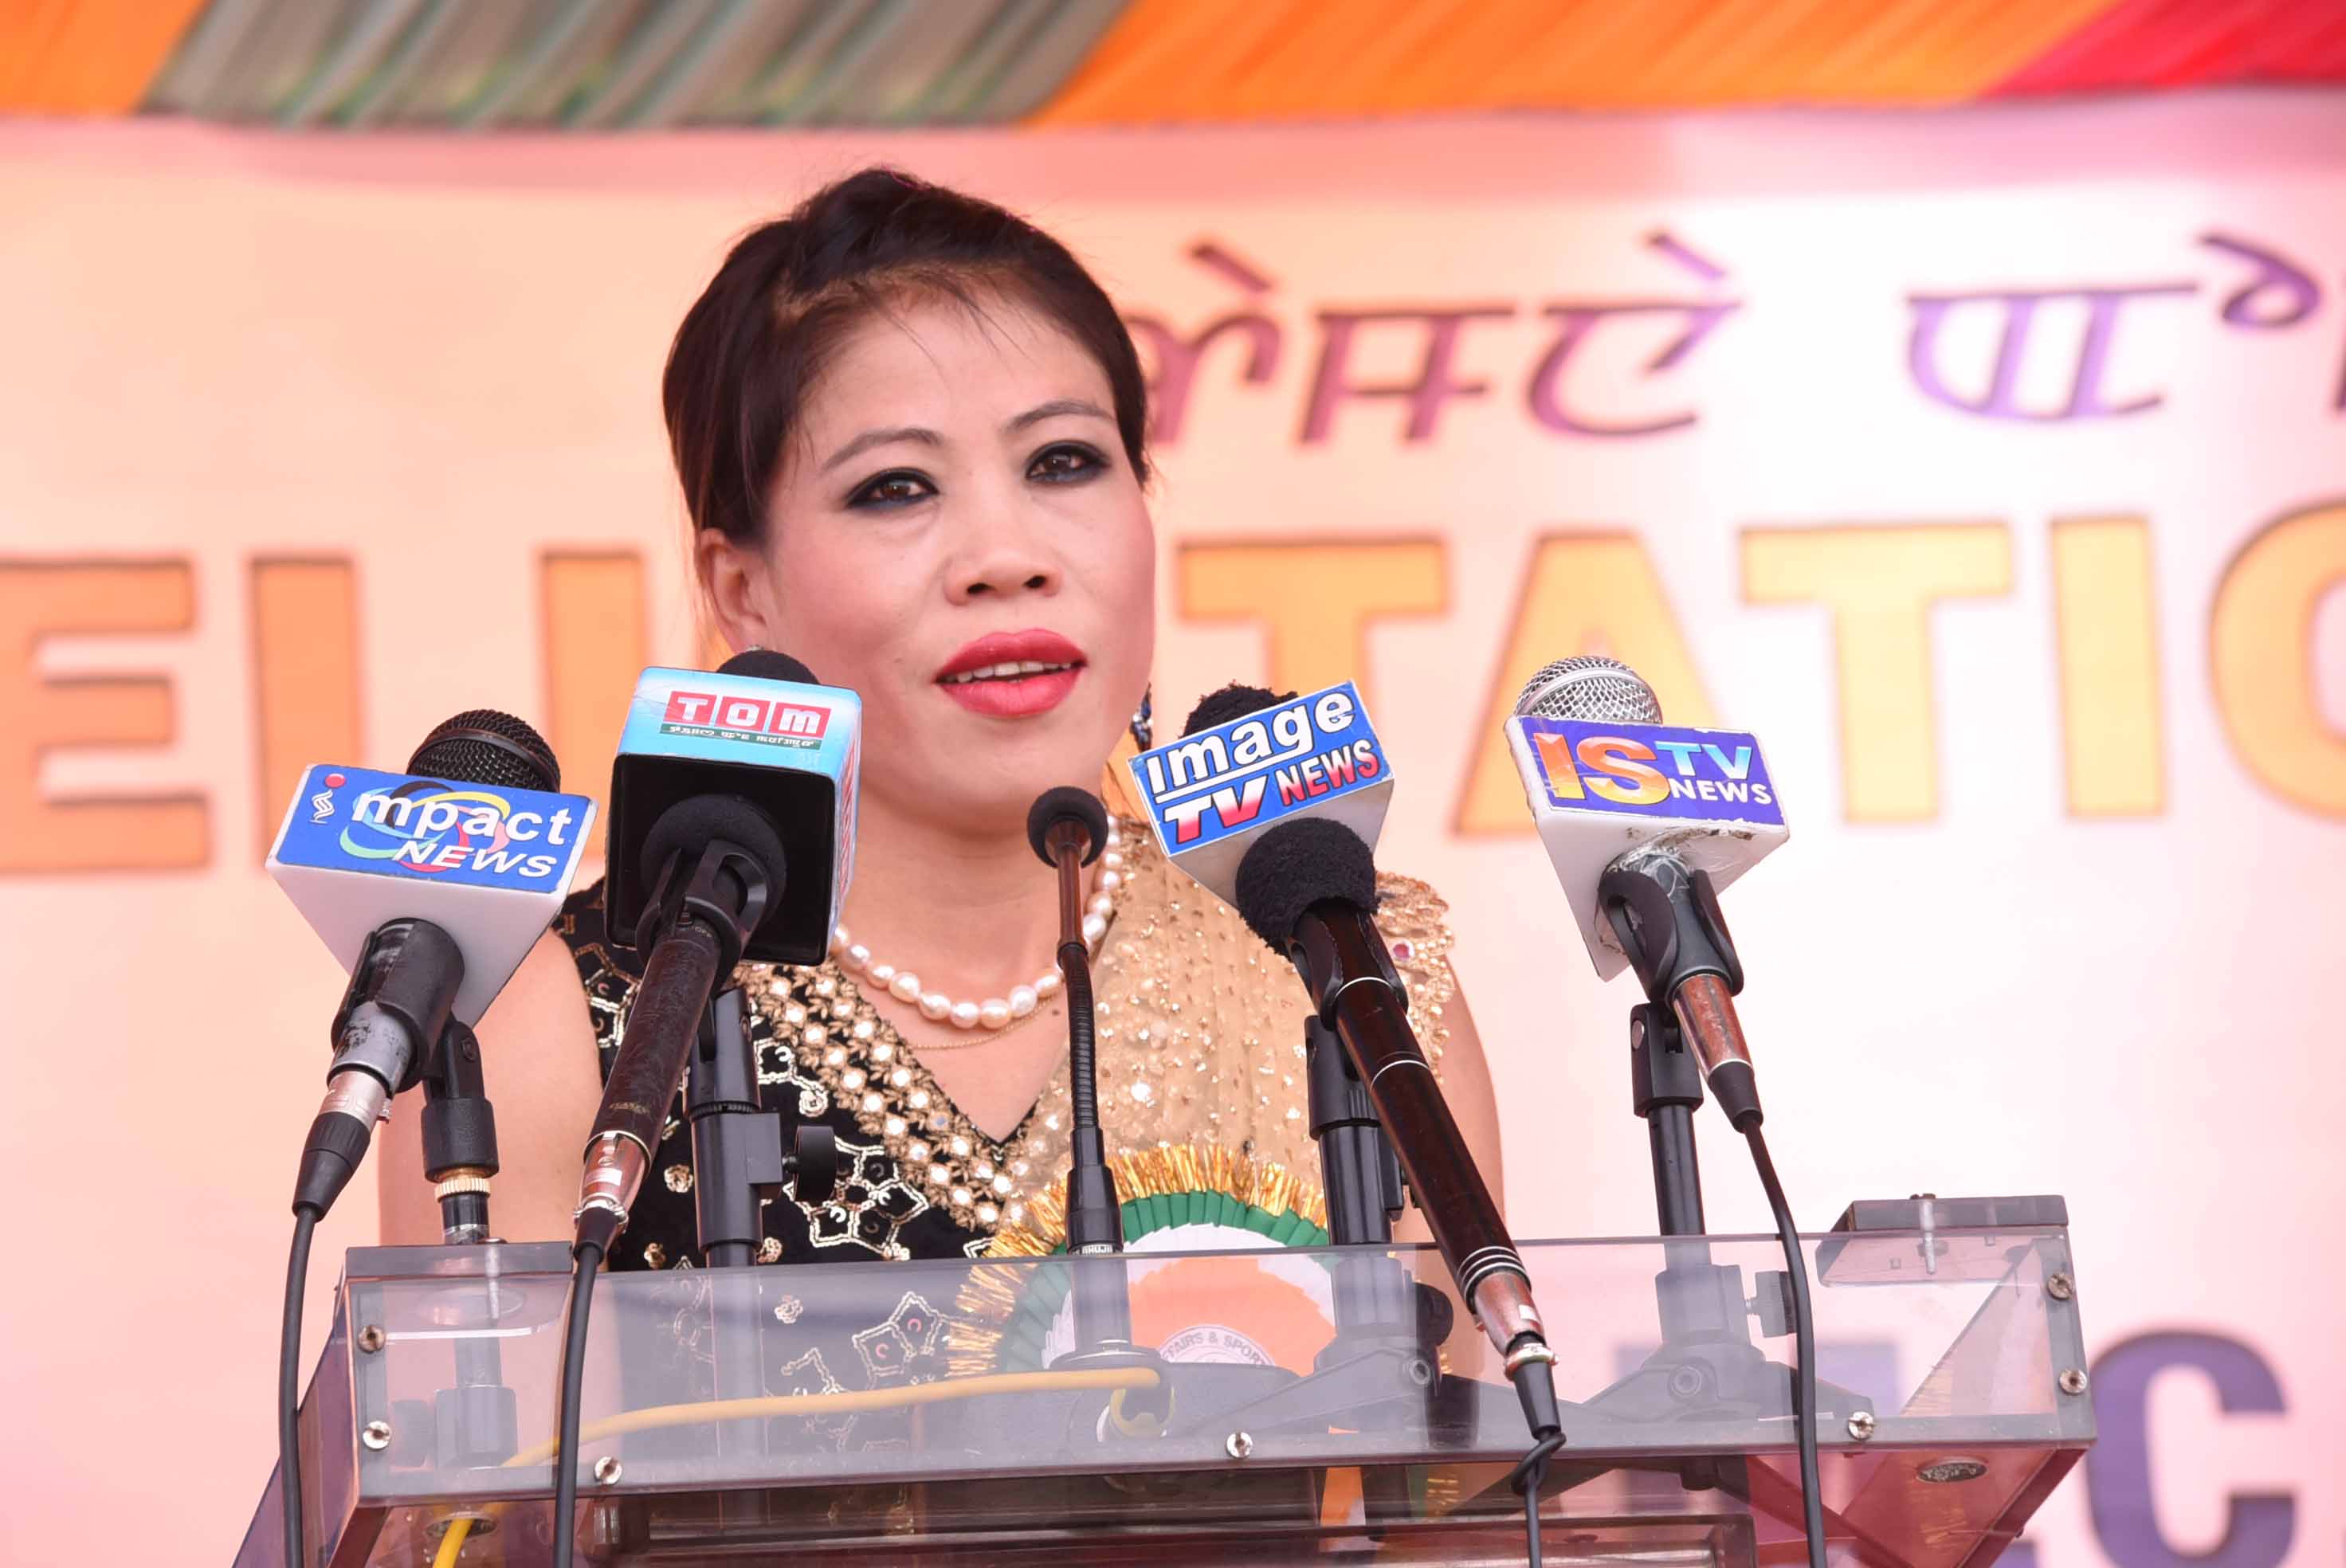 World boxing champion MC Mary Kom honoured with the title 'Meethoileima' at Khuman Lampak :: 11th December 2018